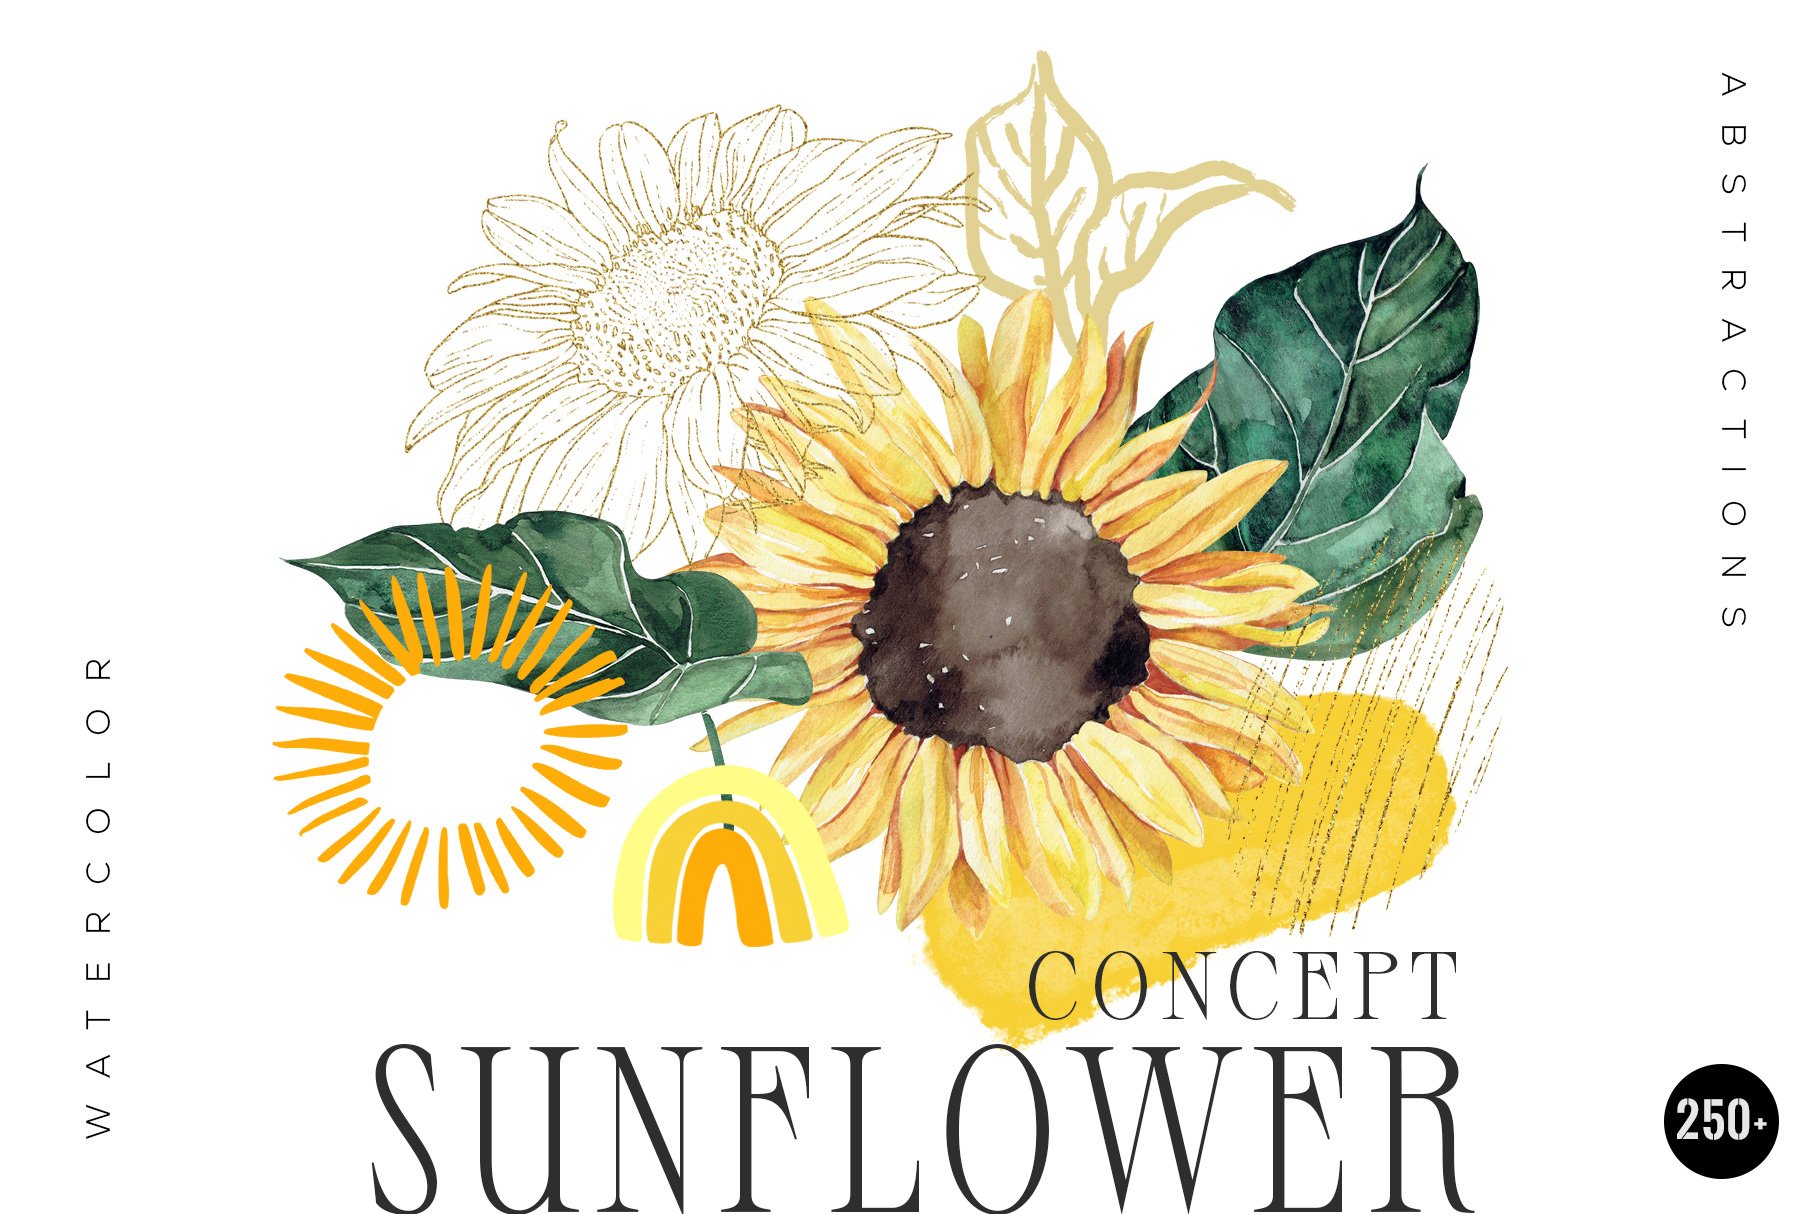 Concept: Sunflower & Abstractions - Design Cuts